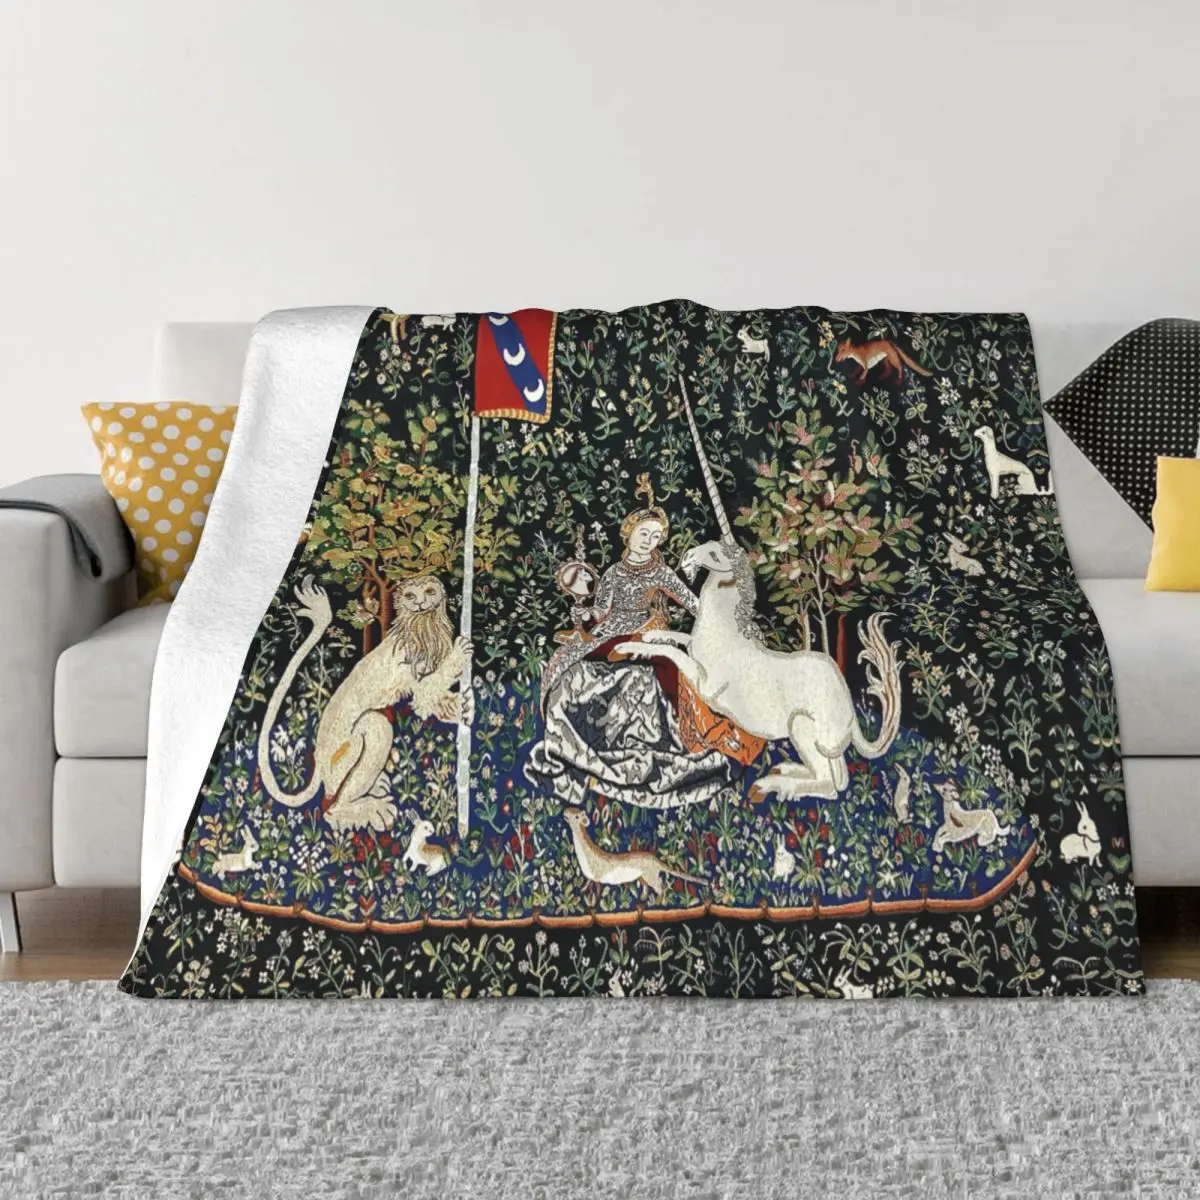 

The Lady And The Unicorn Midnight Floral Coral Fleece Plush Throw Blankets Medieval Renaissance Blankets for Bedding Soft Quilt